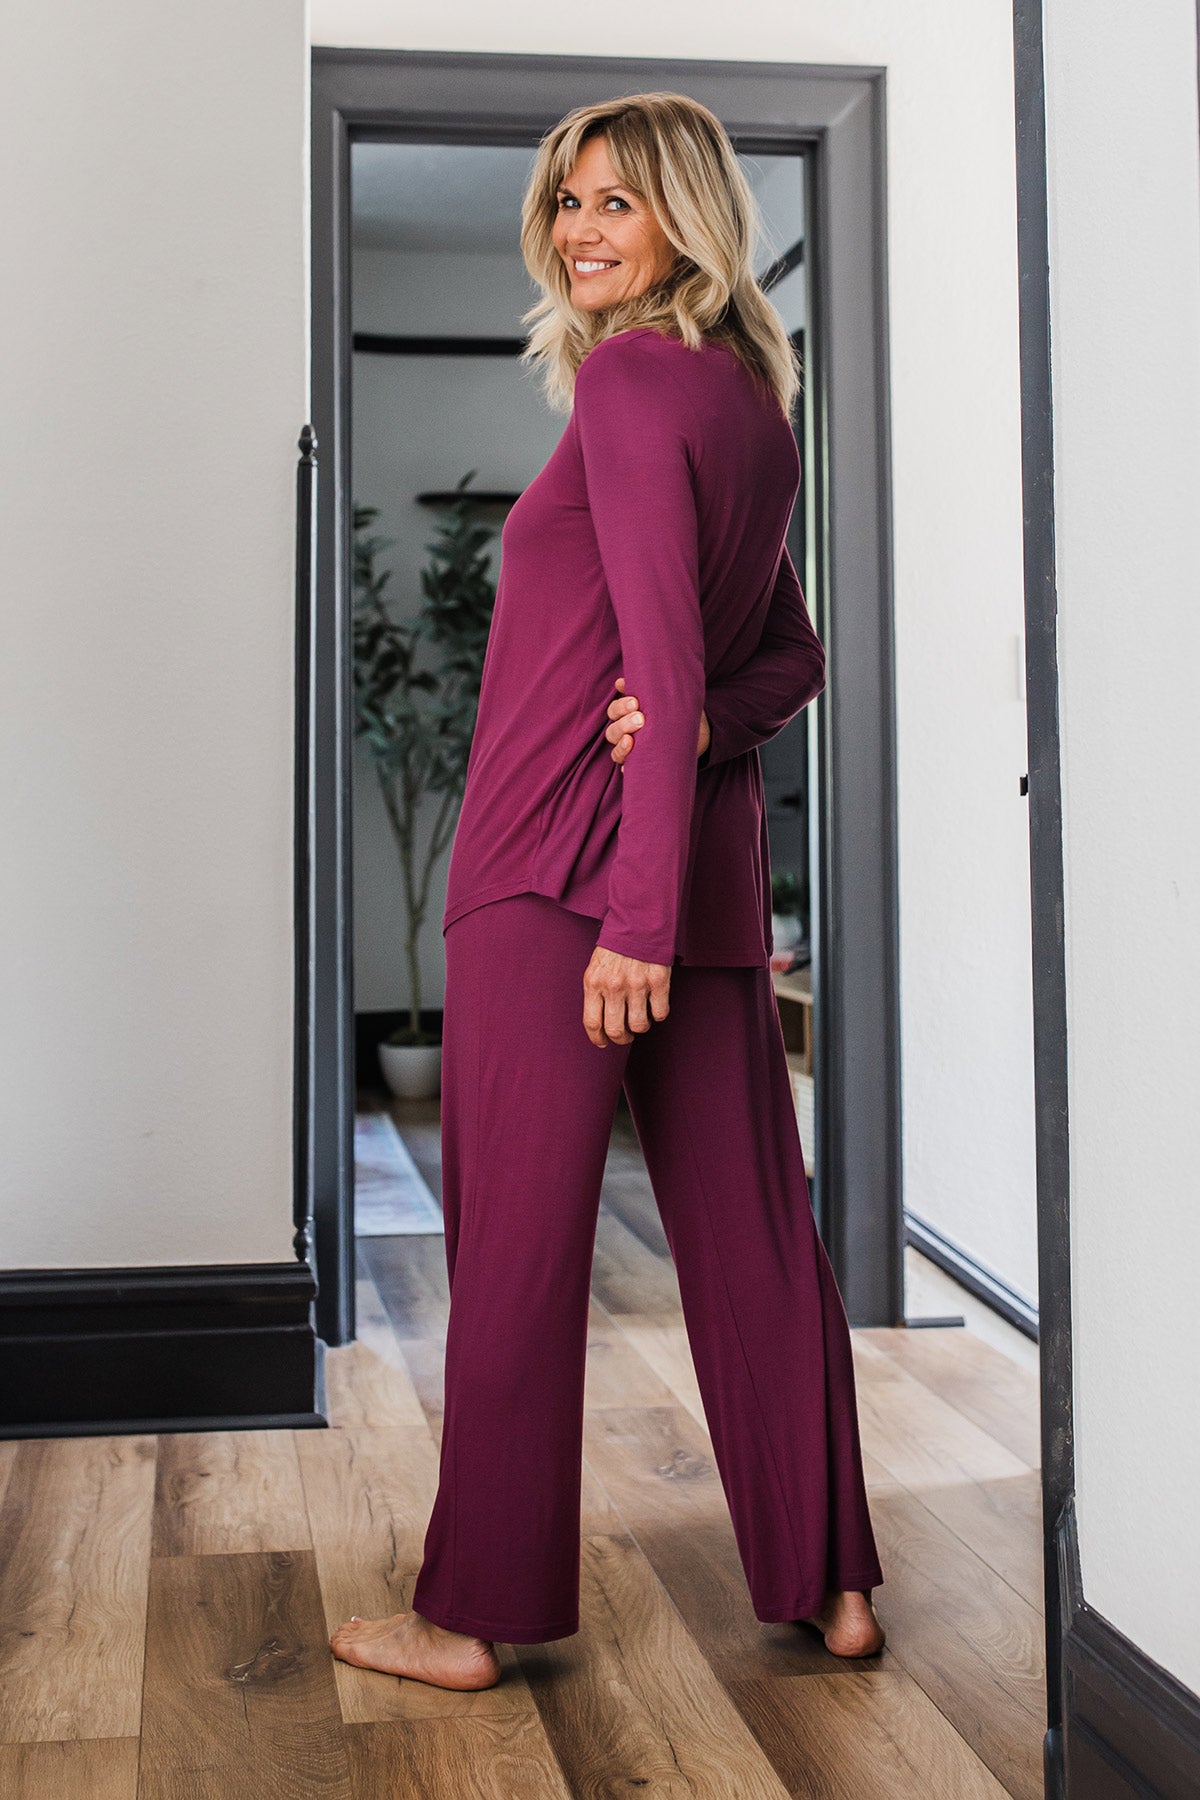 A woman standing facing away from the camera with her arms behind her back while looking back and smiling, wearing Yala Norah Long Sleeve Bamboo Pajama Set in Boysenberry